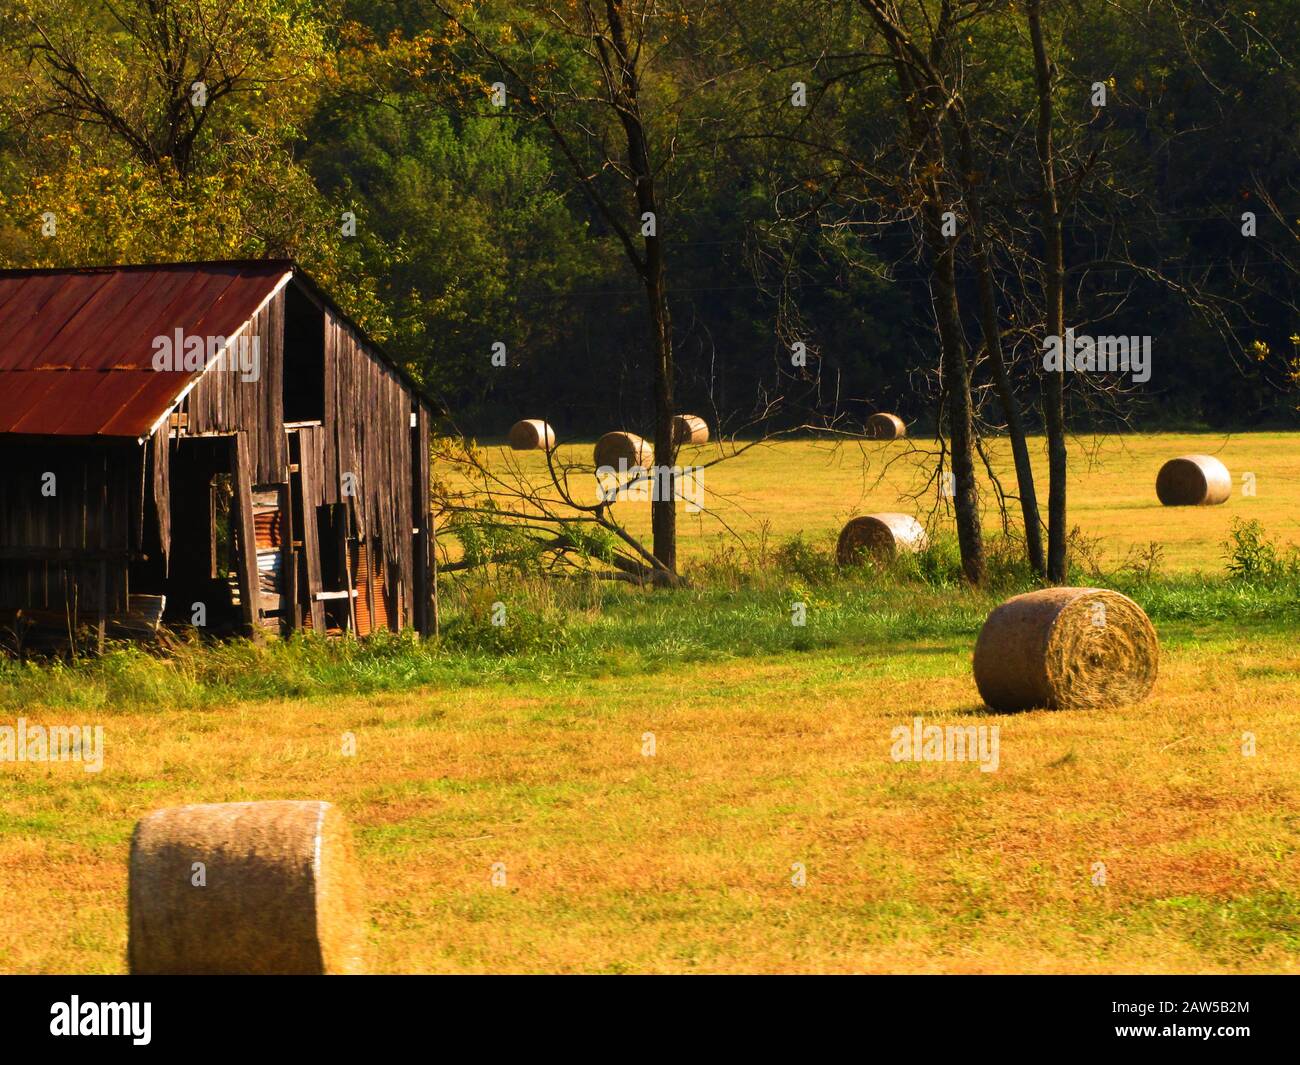 An old barn near some hay bales Stock Photo